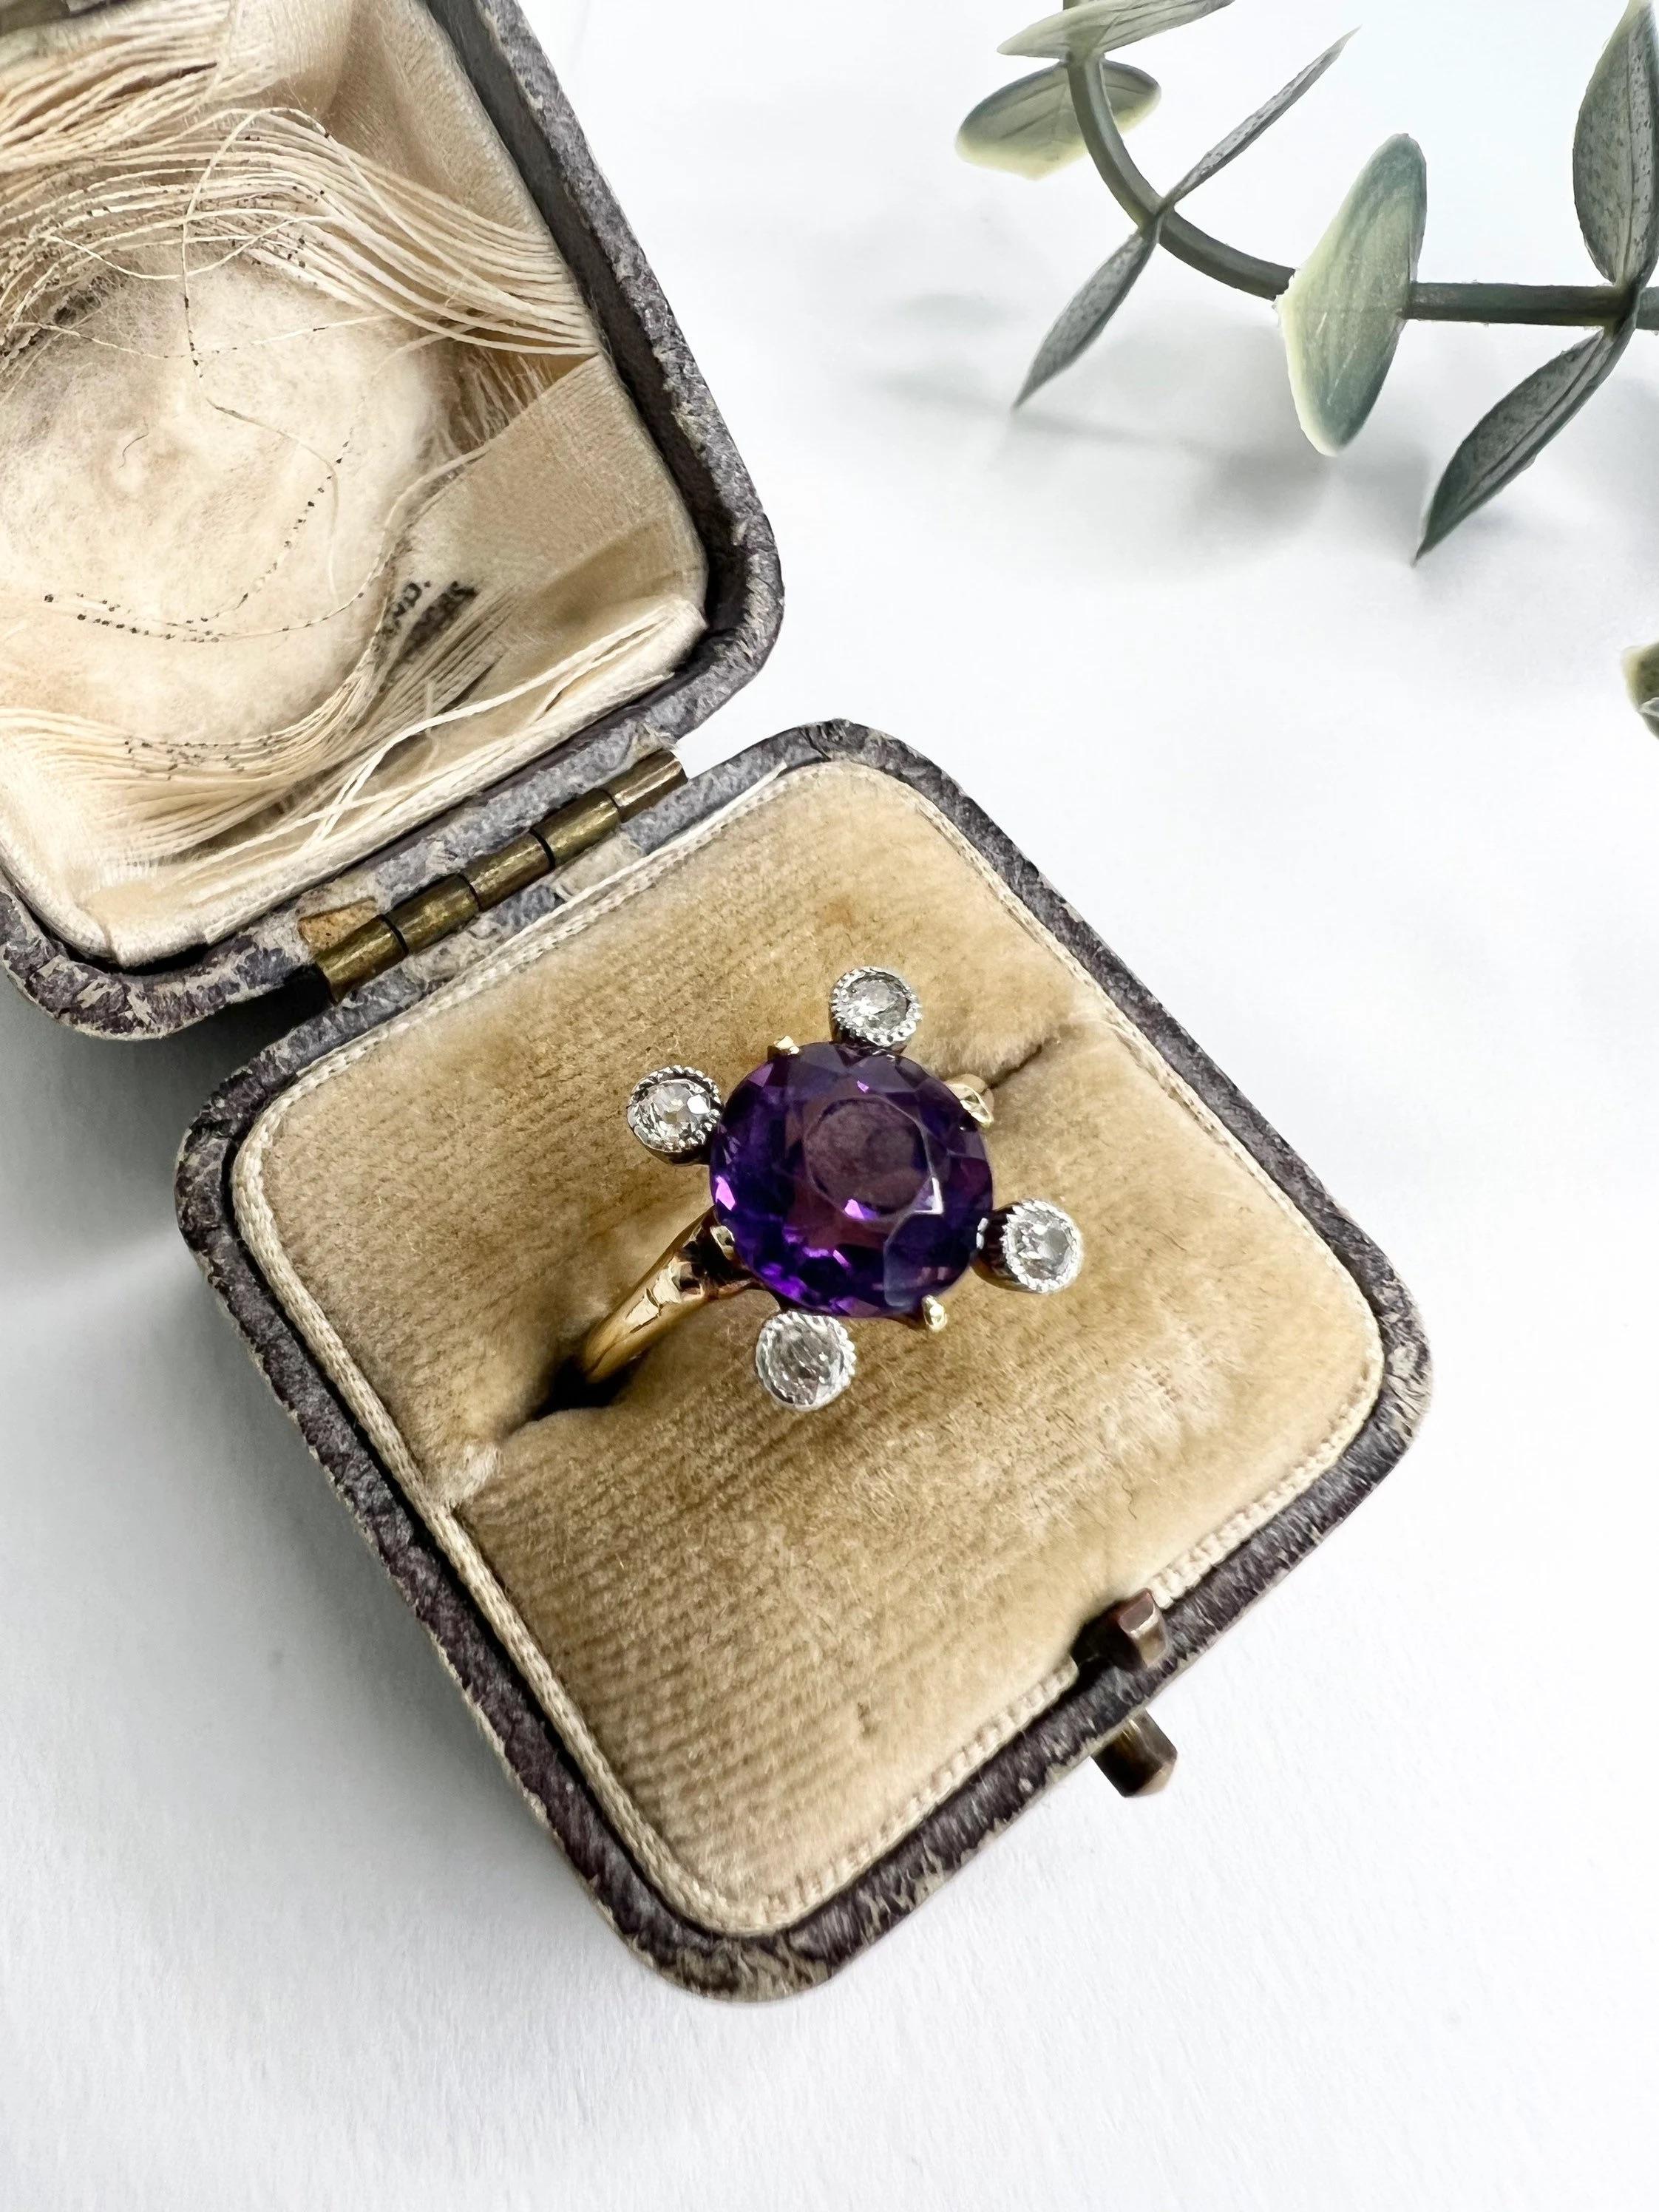 Vintage Amethyst & Diamond Ring 

14ct Gold

Circa 1940’s 

Beautiful Round, Faceted Amethyst Ring with Milgraine Set Diamond Corners. 

Ring Measures Approx: Height 11.5mm & Width 10.5mm

UK Size L

US Size 6 

Can be resized using our resizing